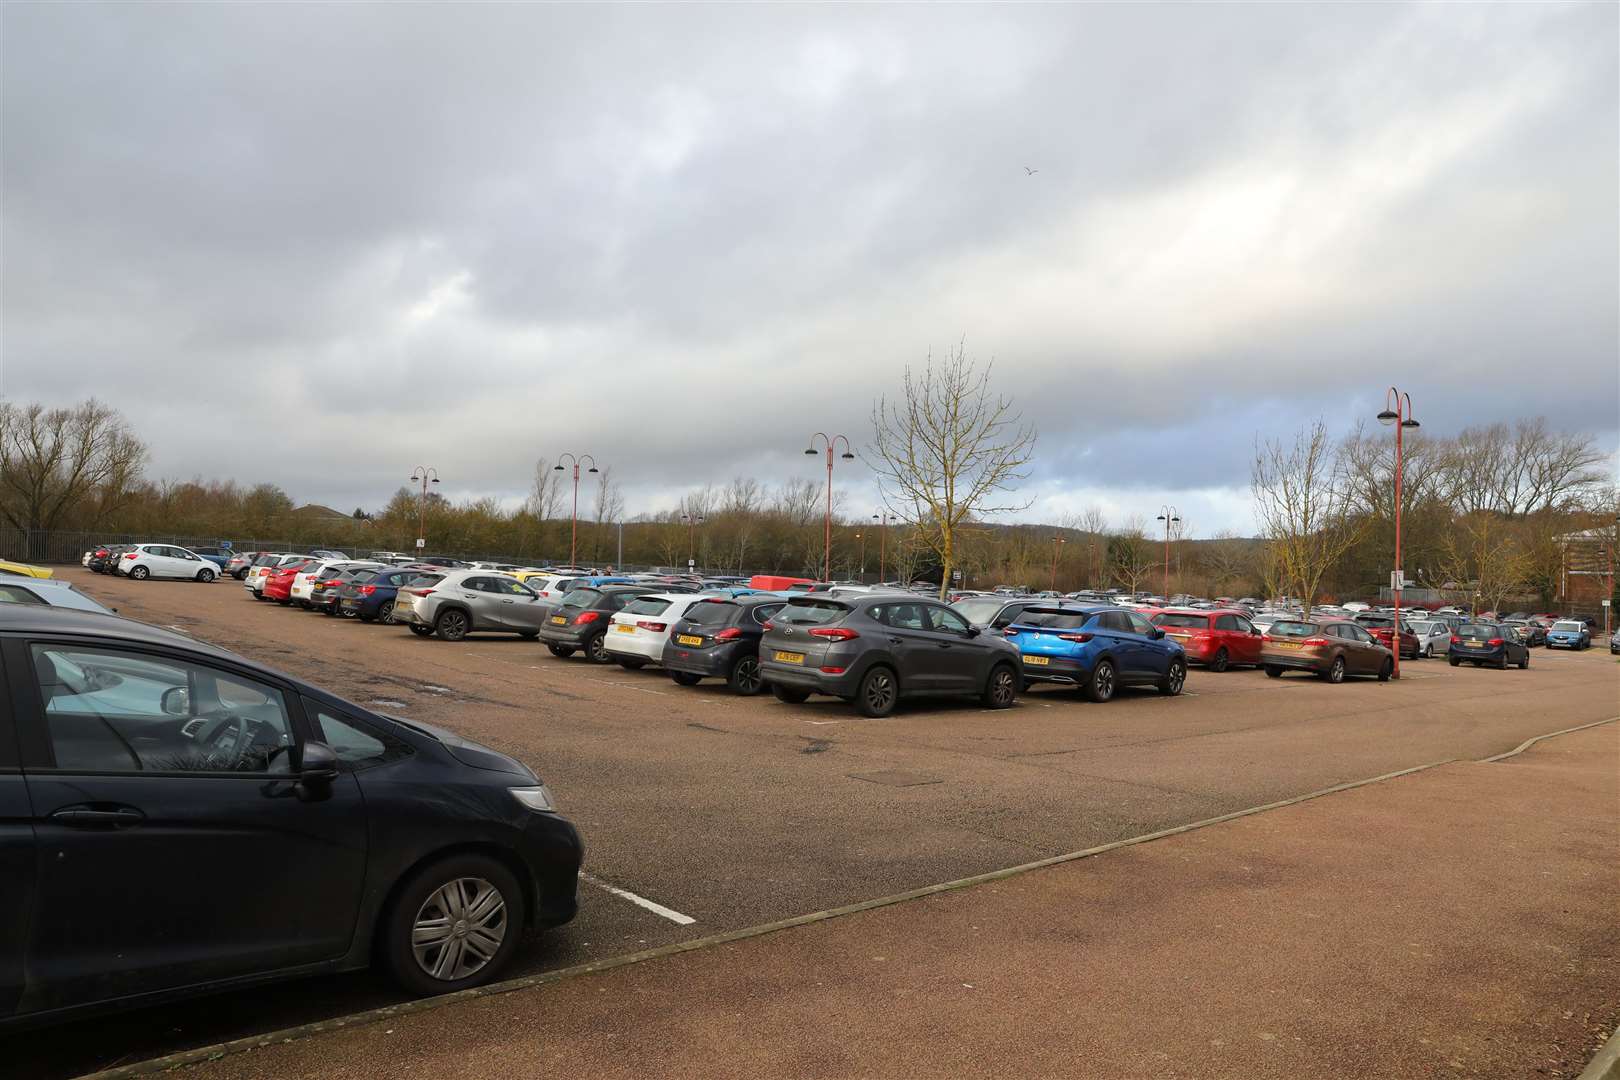 The Wincheap park and ride site in Canterbury